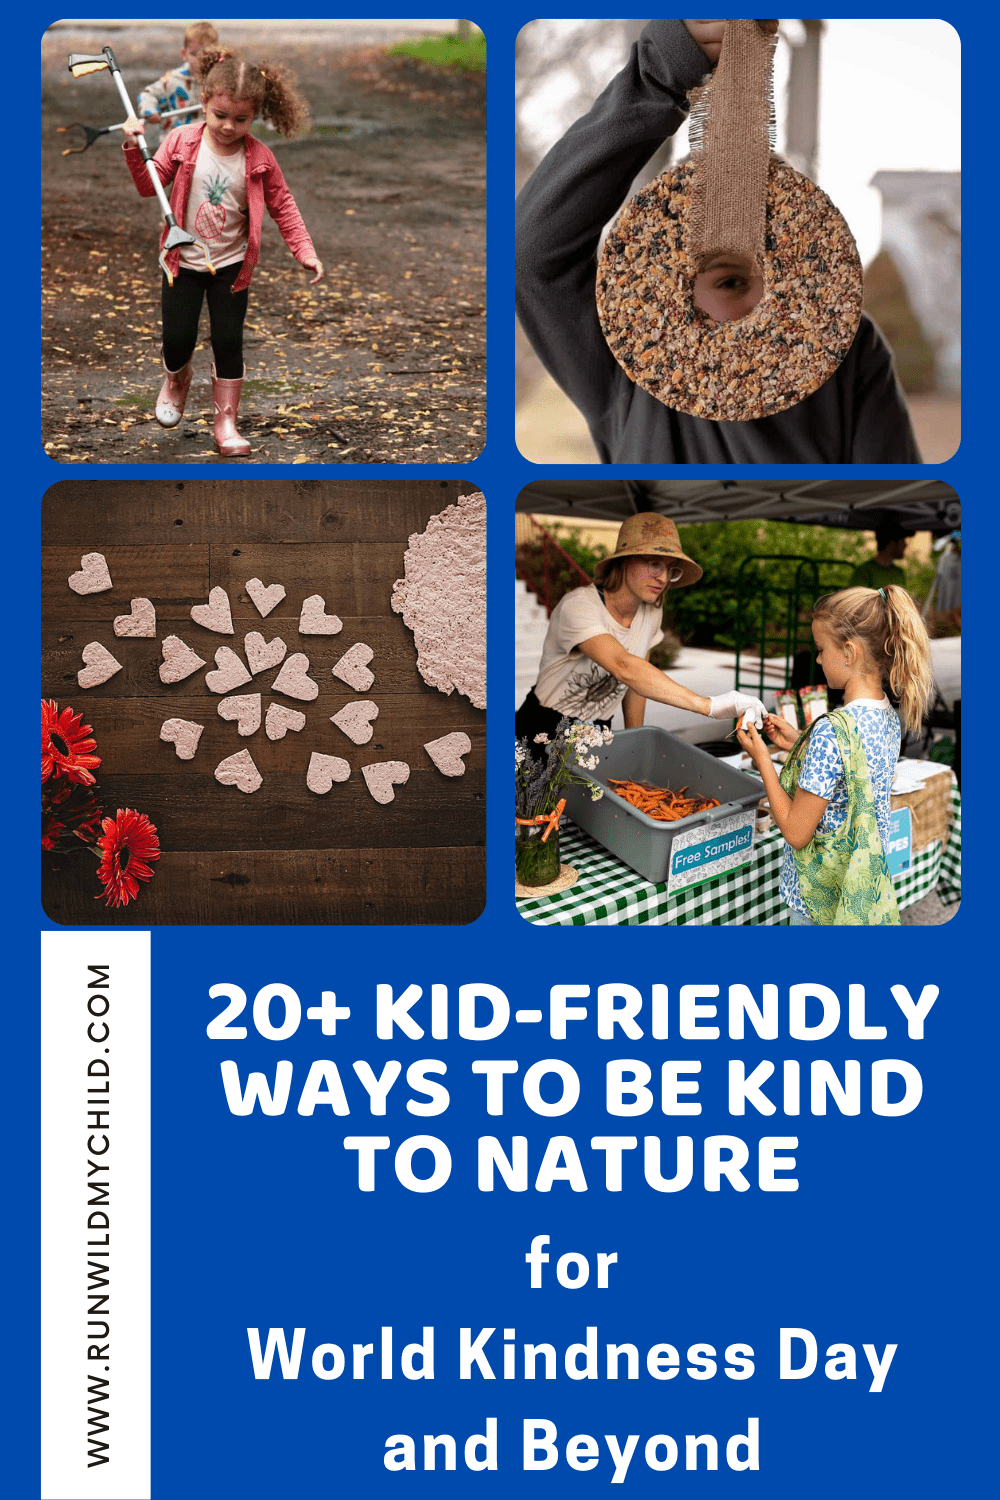 20+ Outdoor Acts of Kindness for Kids & Ways to Be Kind to Nature